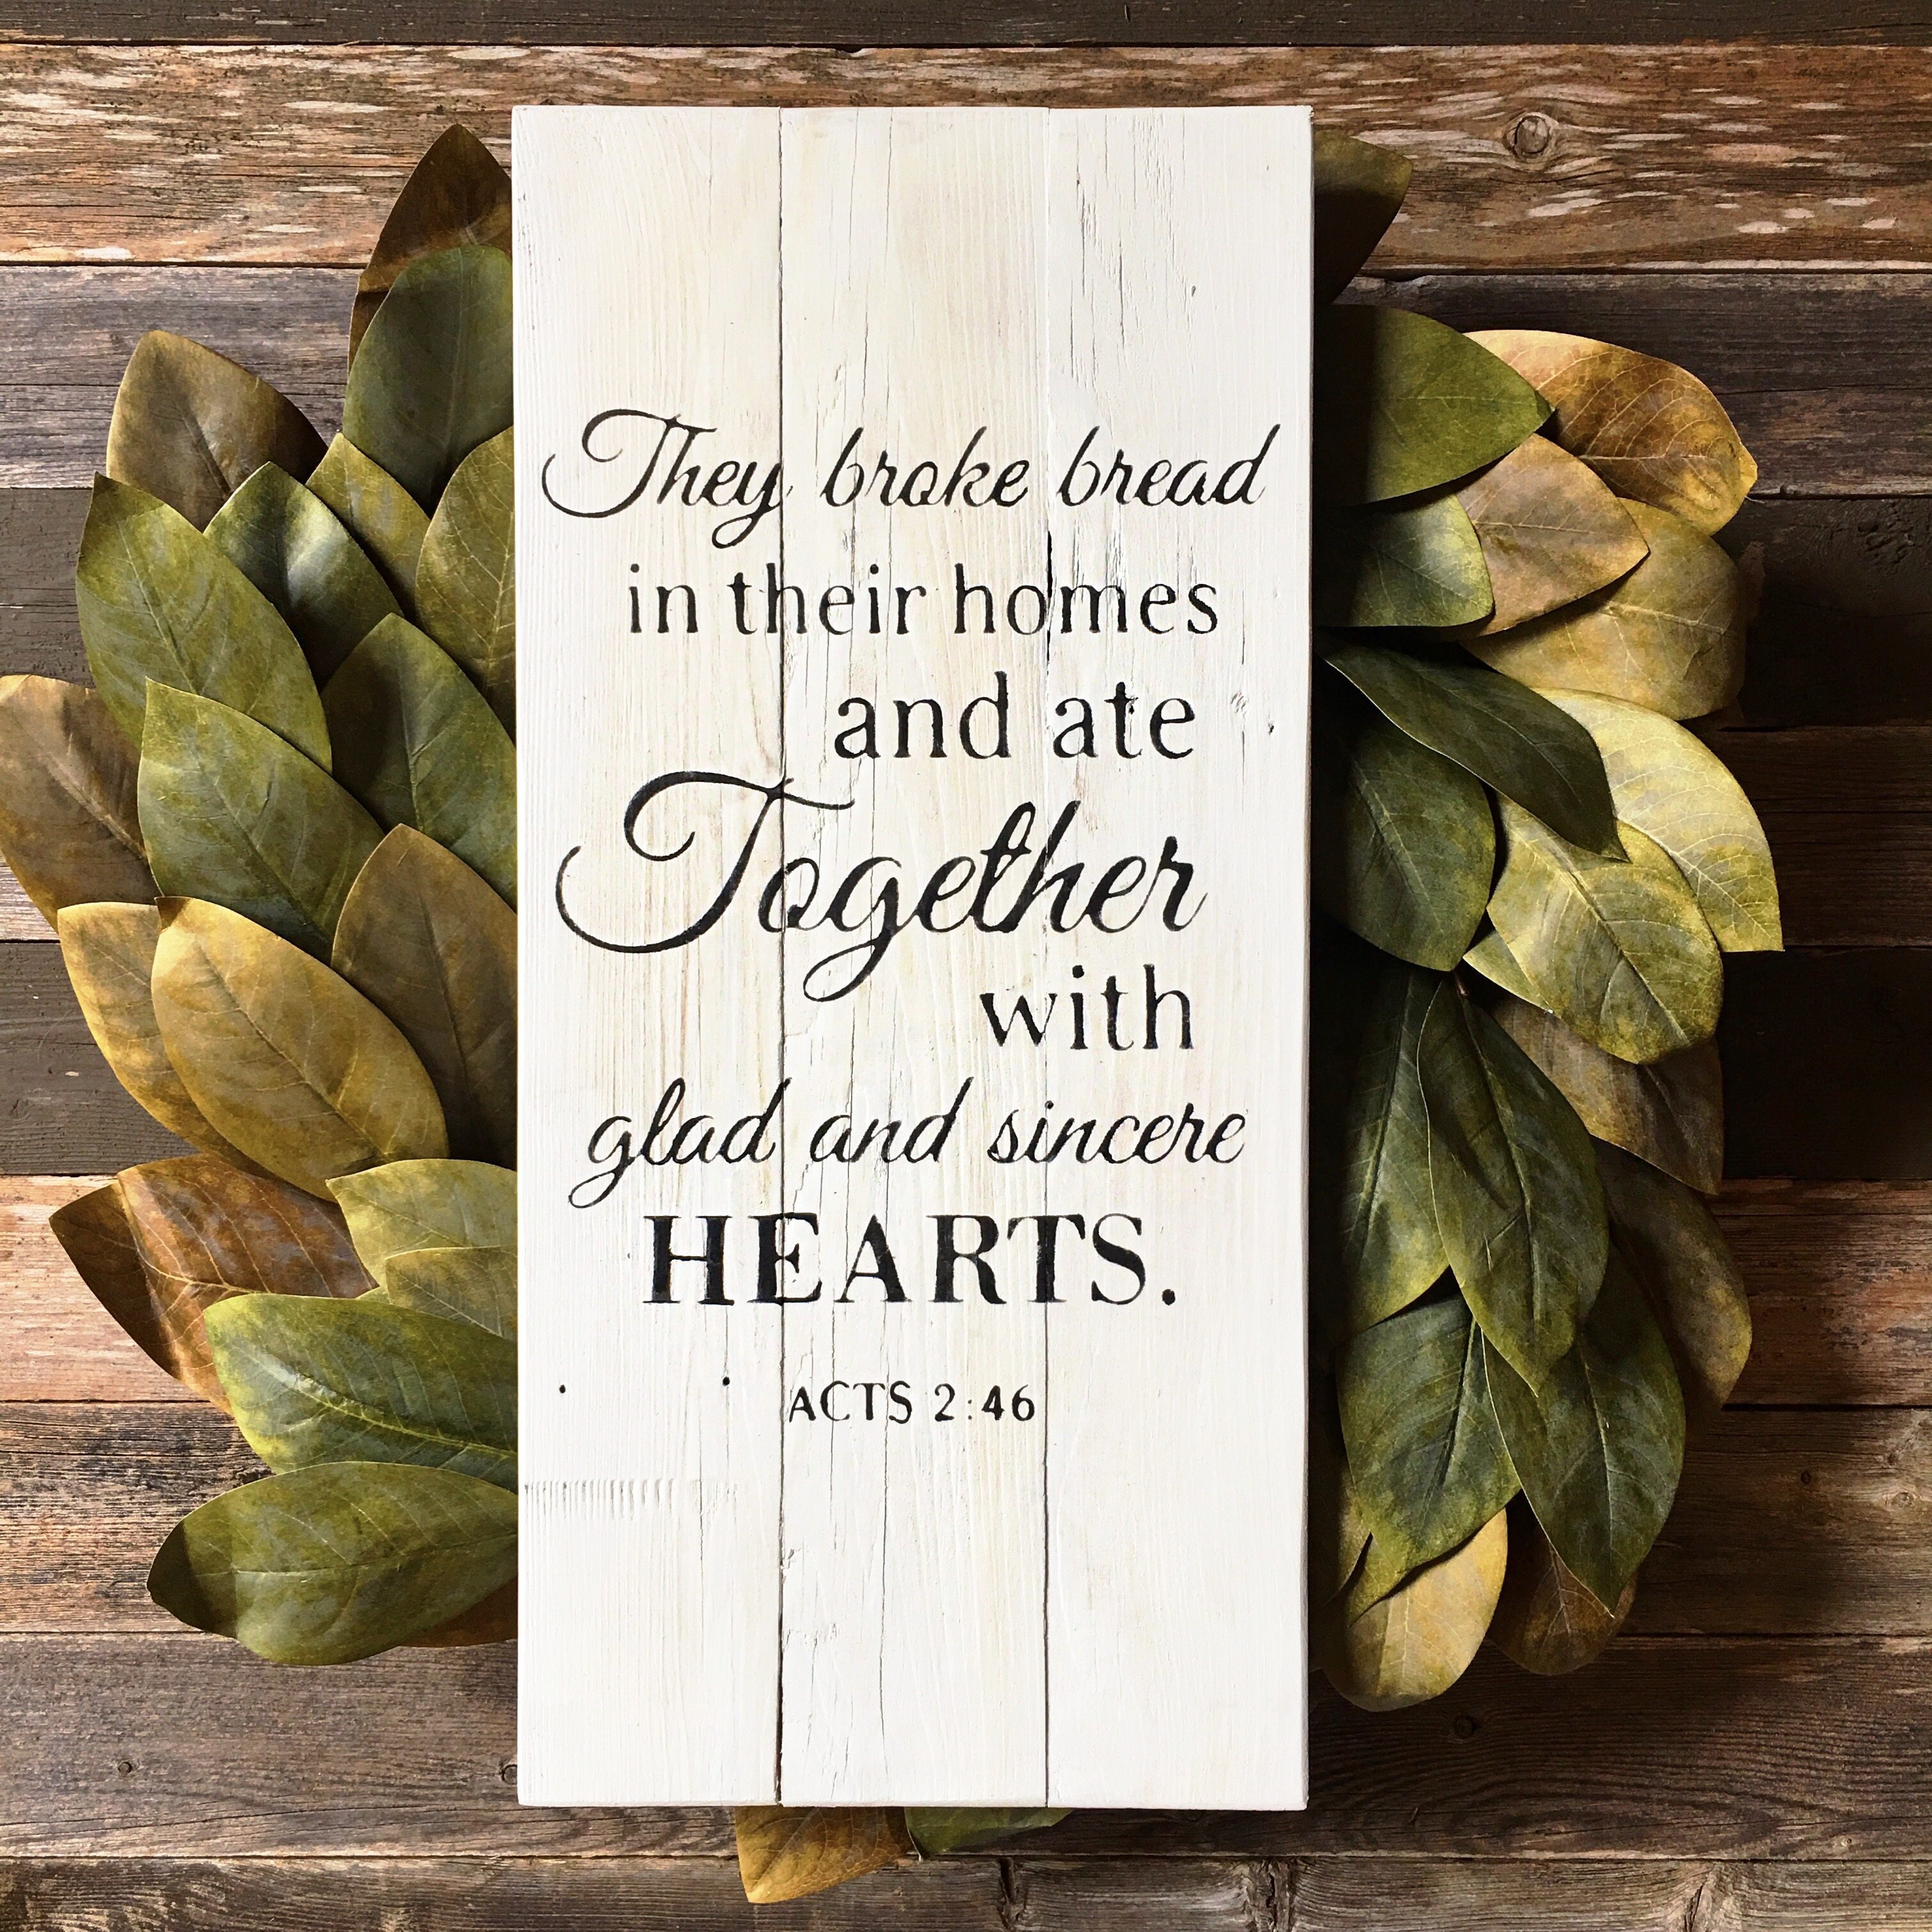 They broke bread in their homes | Acts 2:46 | Wood sign with They broke bread | Reclaimed Wood Signs Bible Verse | Bible Verse Wood Signs | Scripture signs | They broke bread in their homes and ate together with glad and sincere hearts. -Acts 2:46